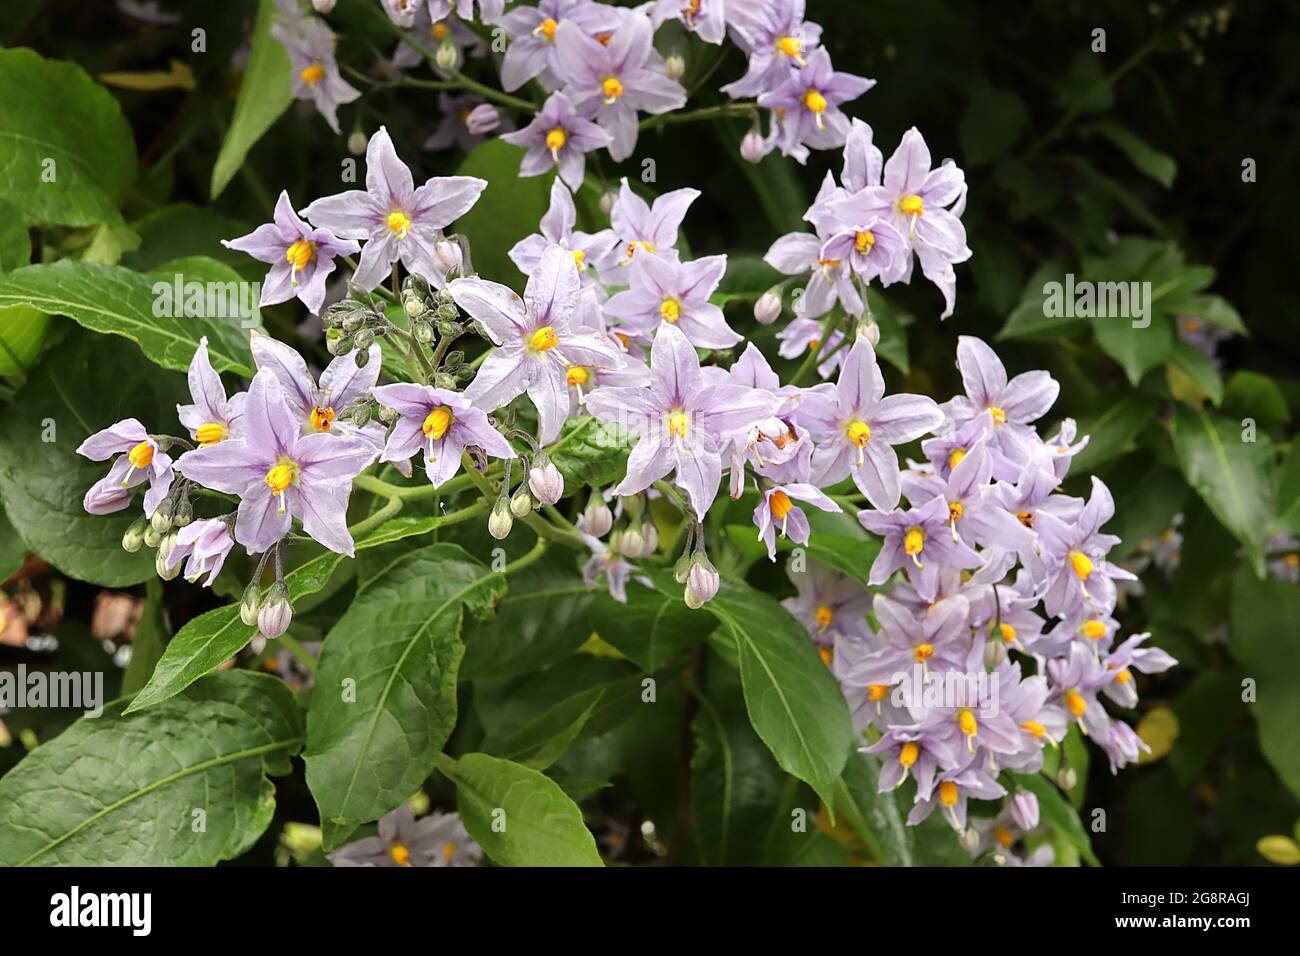 Solanum crispum ‘Glasnevin’ potato tree Glasnevin – clusters of lavender mauve star-shaped flowers with fused yellow stamens, May, England, UK Stock Photo